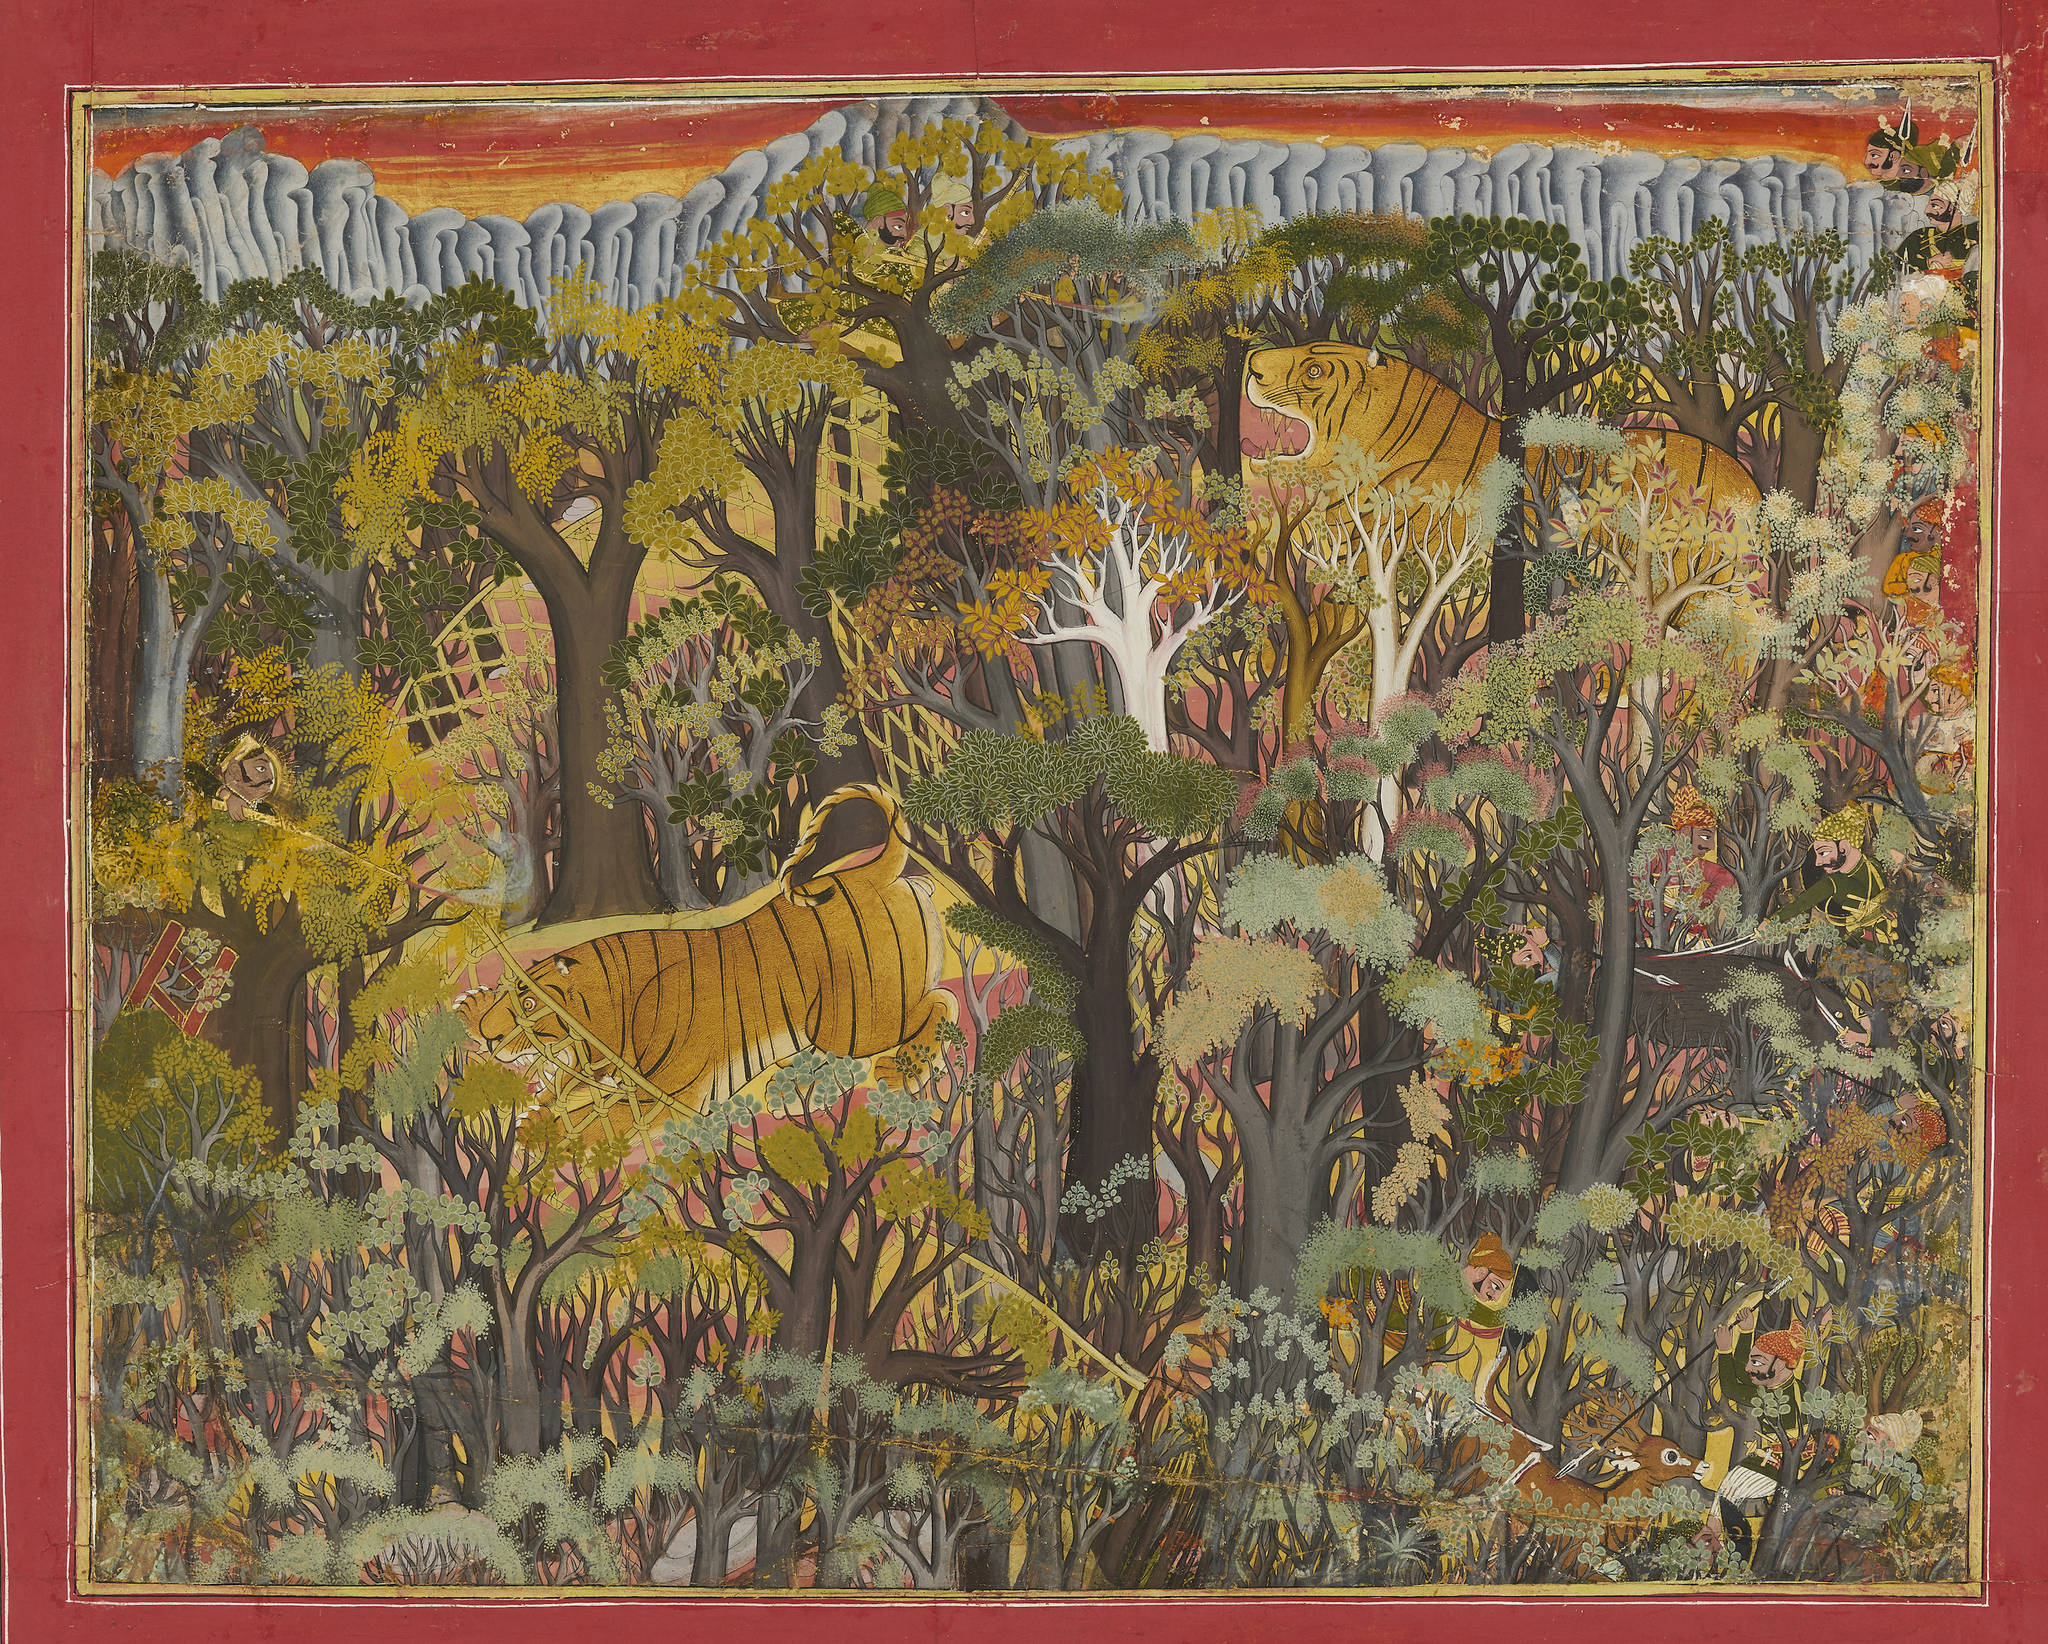 SAM brings in Indian royalty for ‘Peacock In the Desert.’ ||| Sheikh Taju, ‘Maharao Umed Singh of Kota on a Hunt,’ 1780, opaque watercolor and gold on paper, 26 × 20.5 in. Photo by Neil Greentress/Mehrangarh Museum Trust